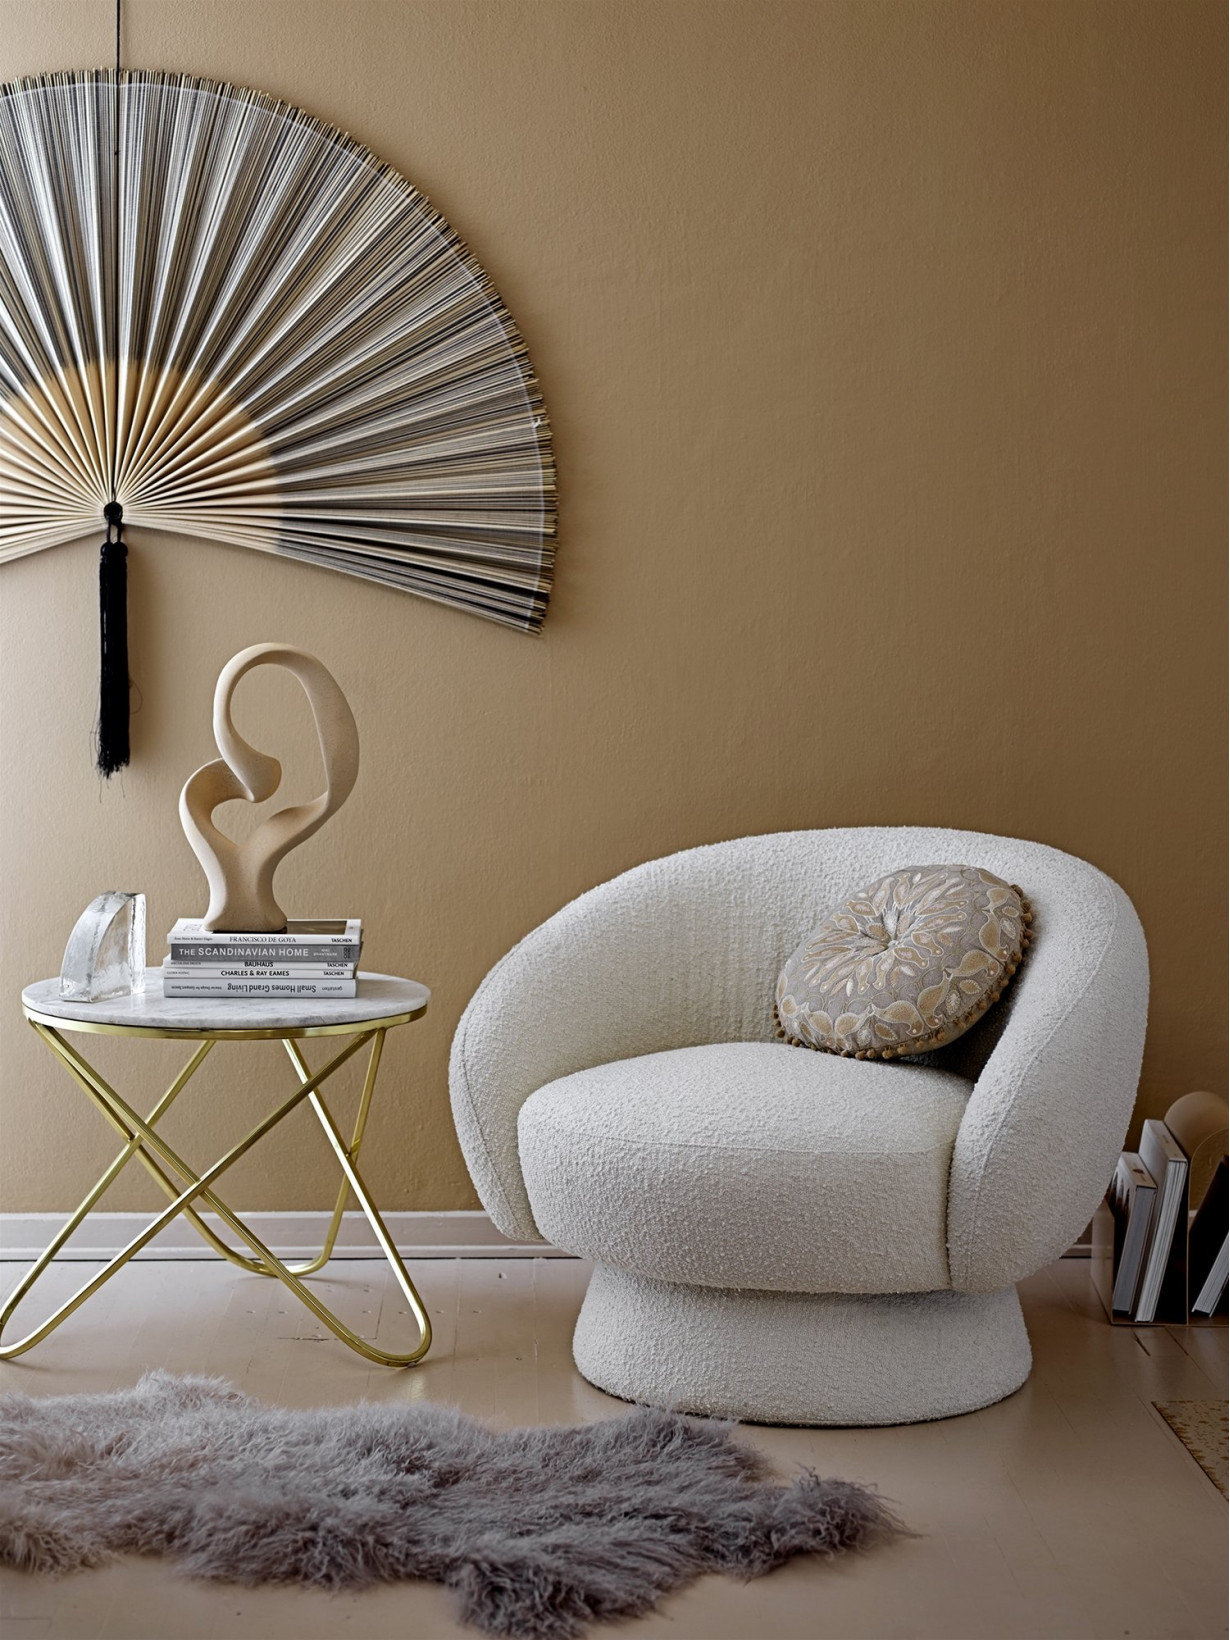 Ecru fabric upholstered armchair, Ted - Bloomingville